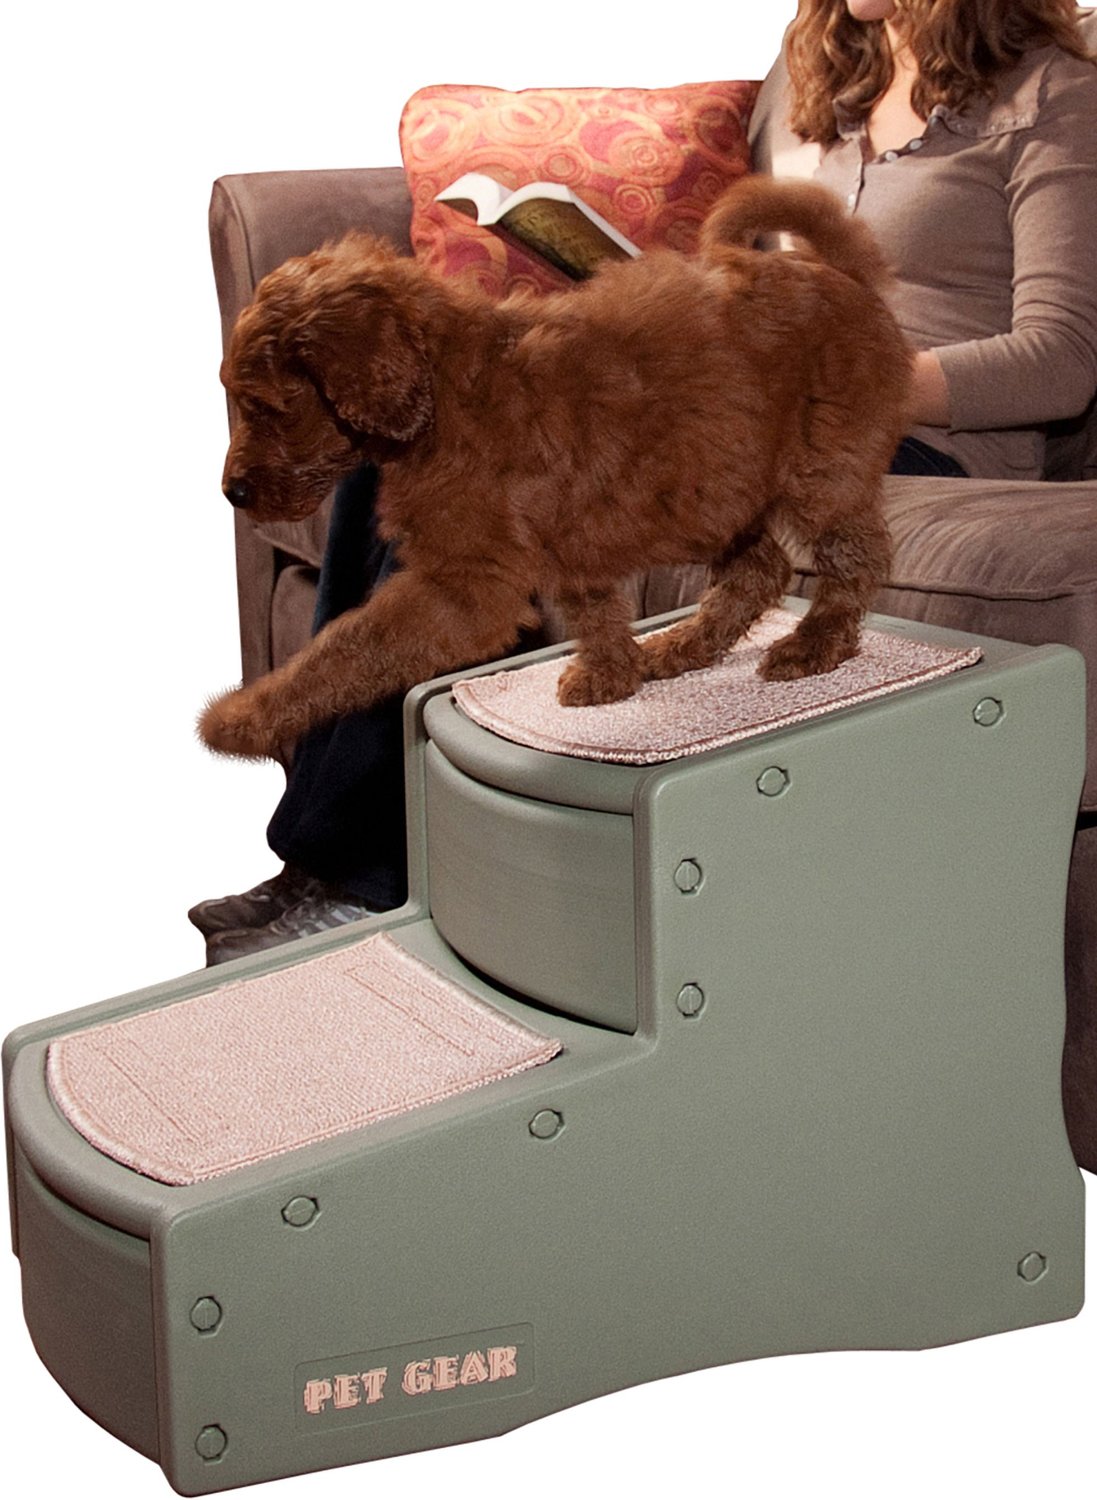 Pet 99 цены. Pet Gear easy Step II Pet Stairs, 2 Step for Cats/Dogs up to 150 pounds. Ступеньки для собак. Ступеньки для крупных собак. Ступеньки для собак мелких пород.